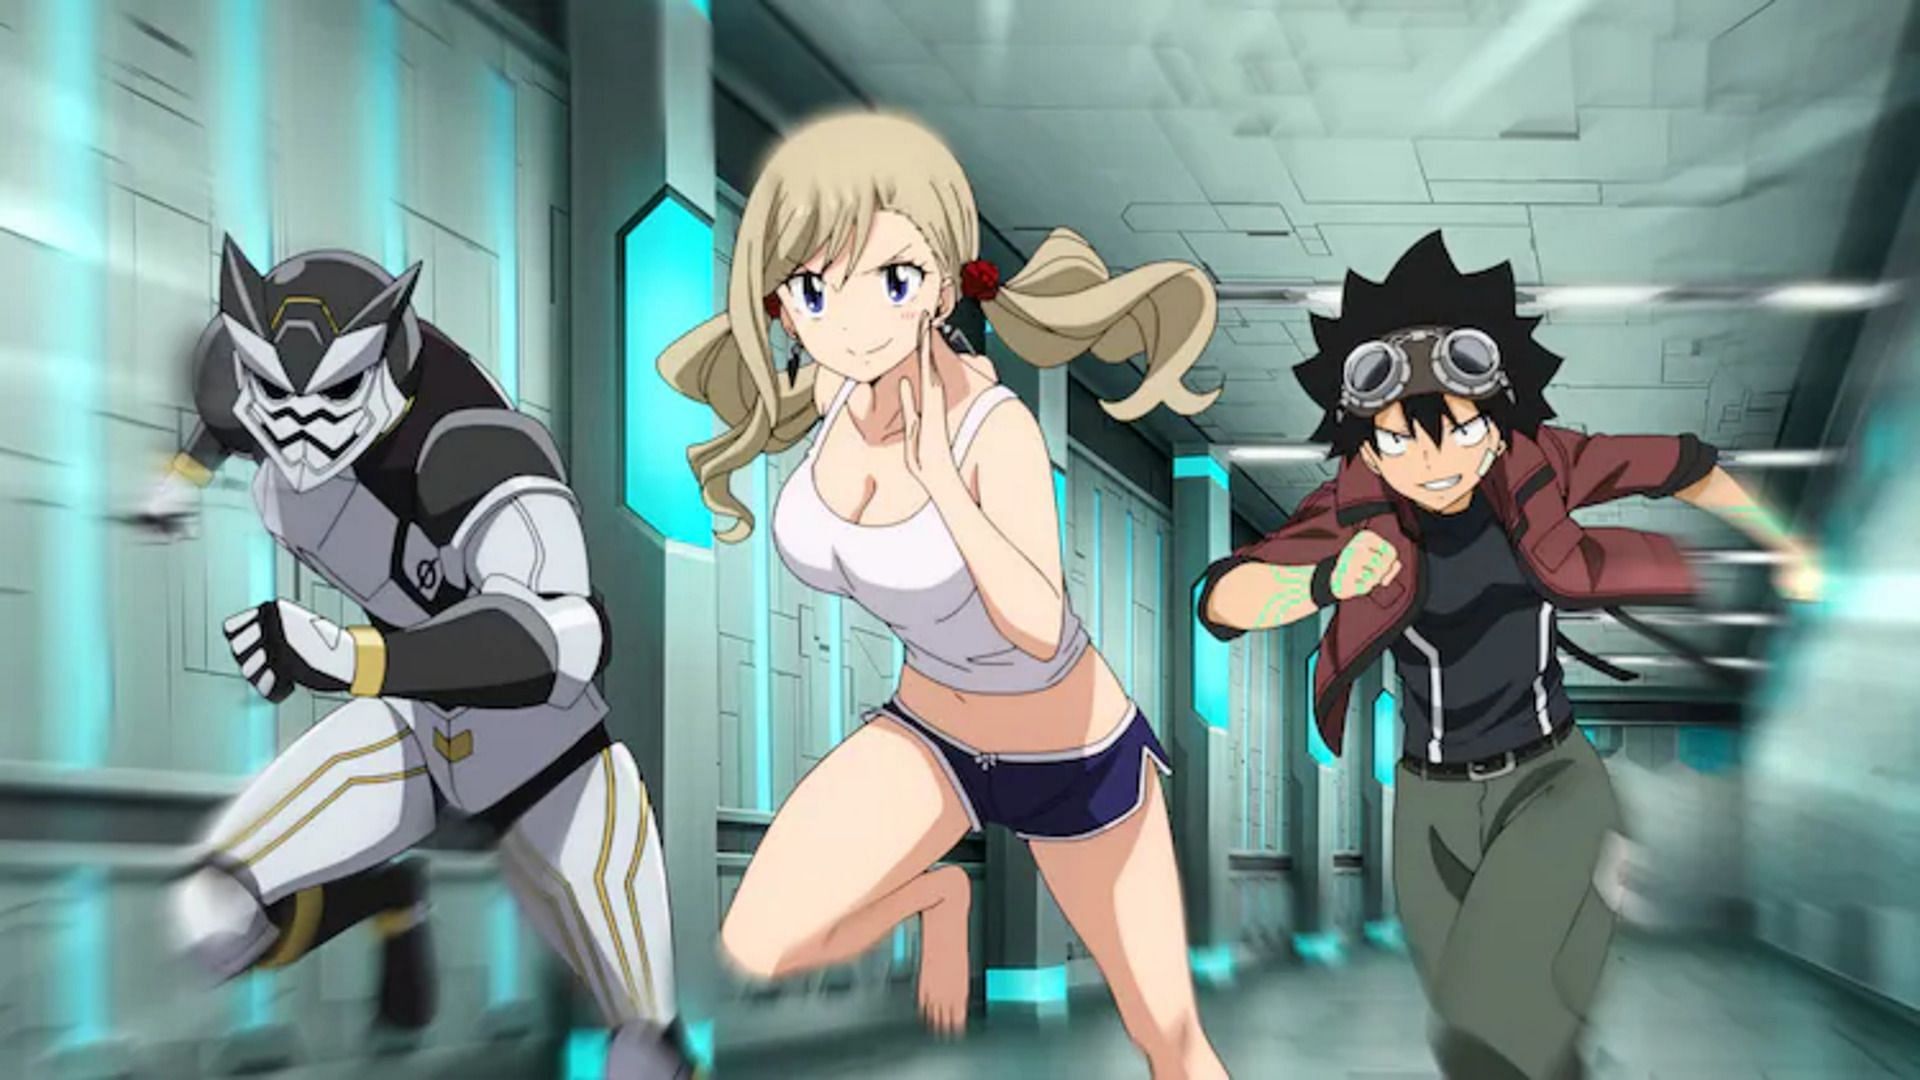 Characters appearing in Edens Zero 2nd Season Anime